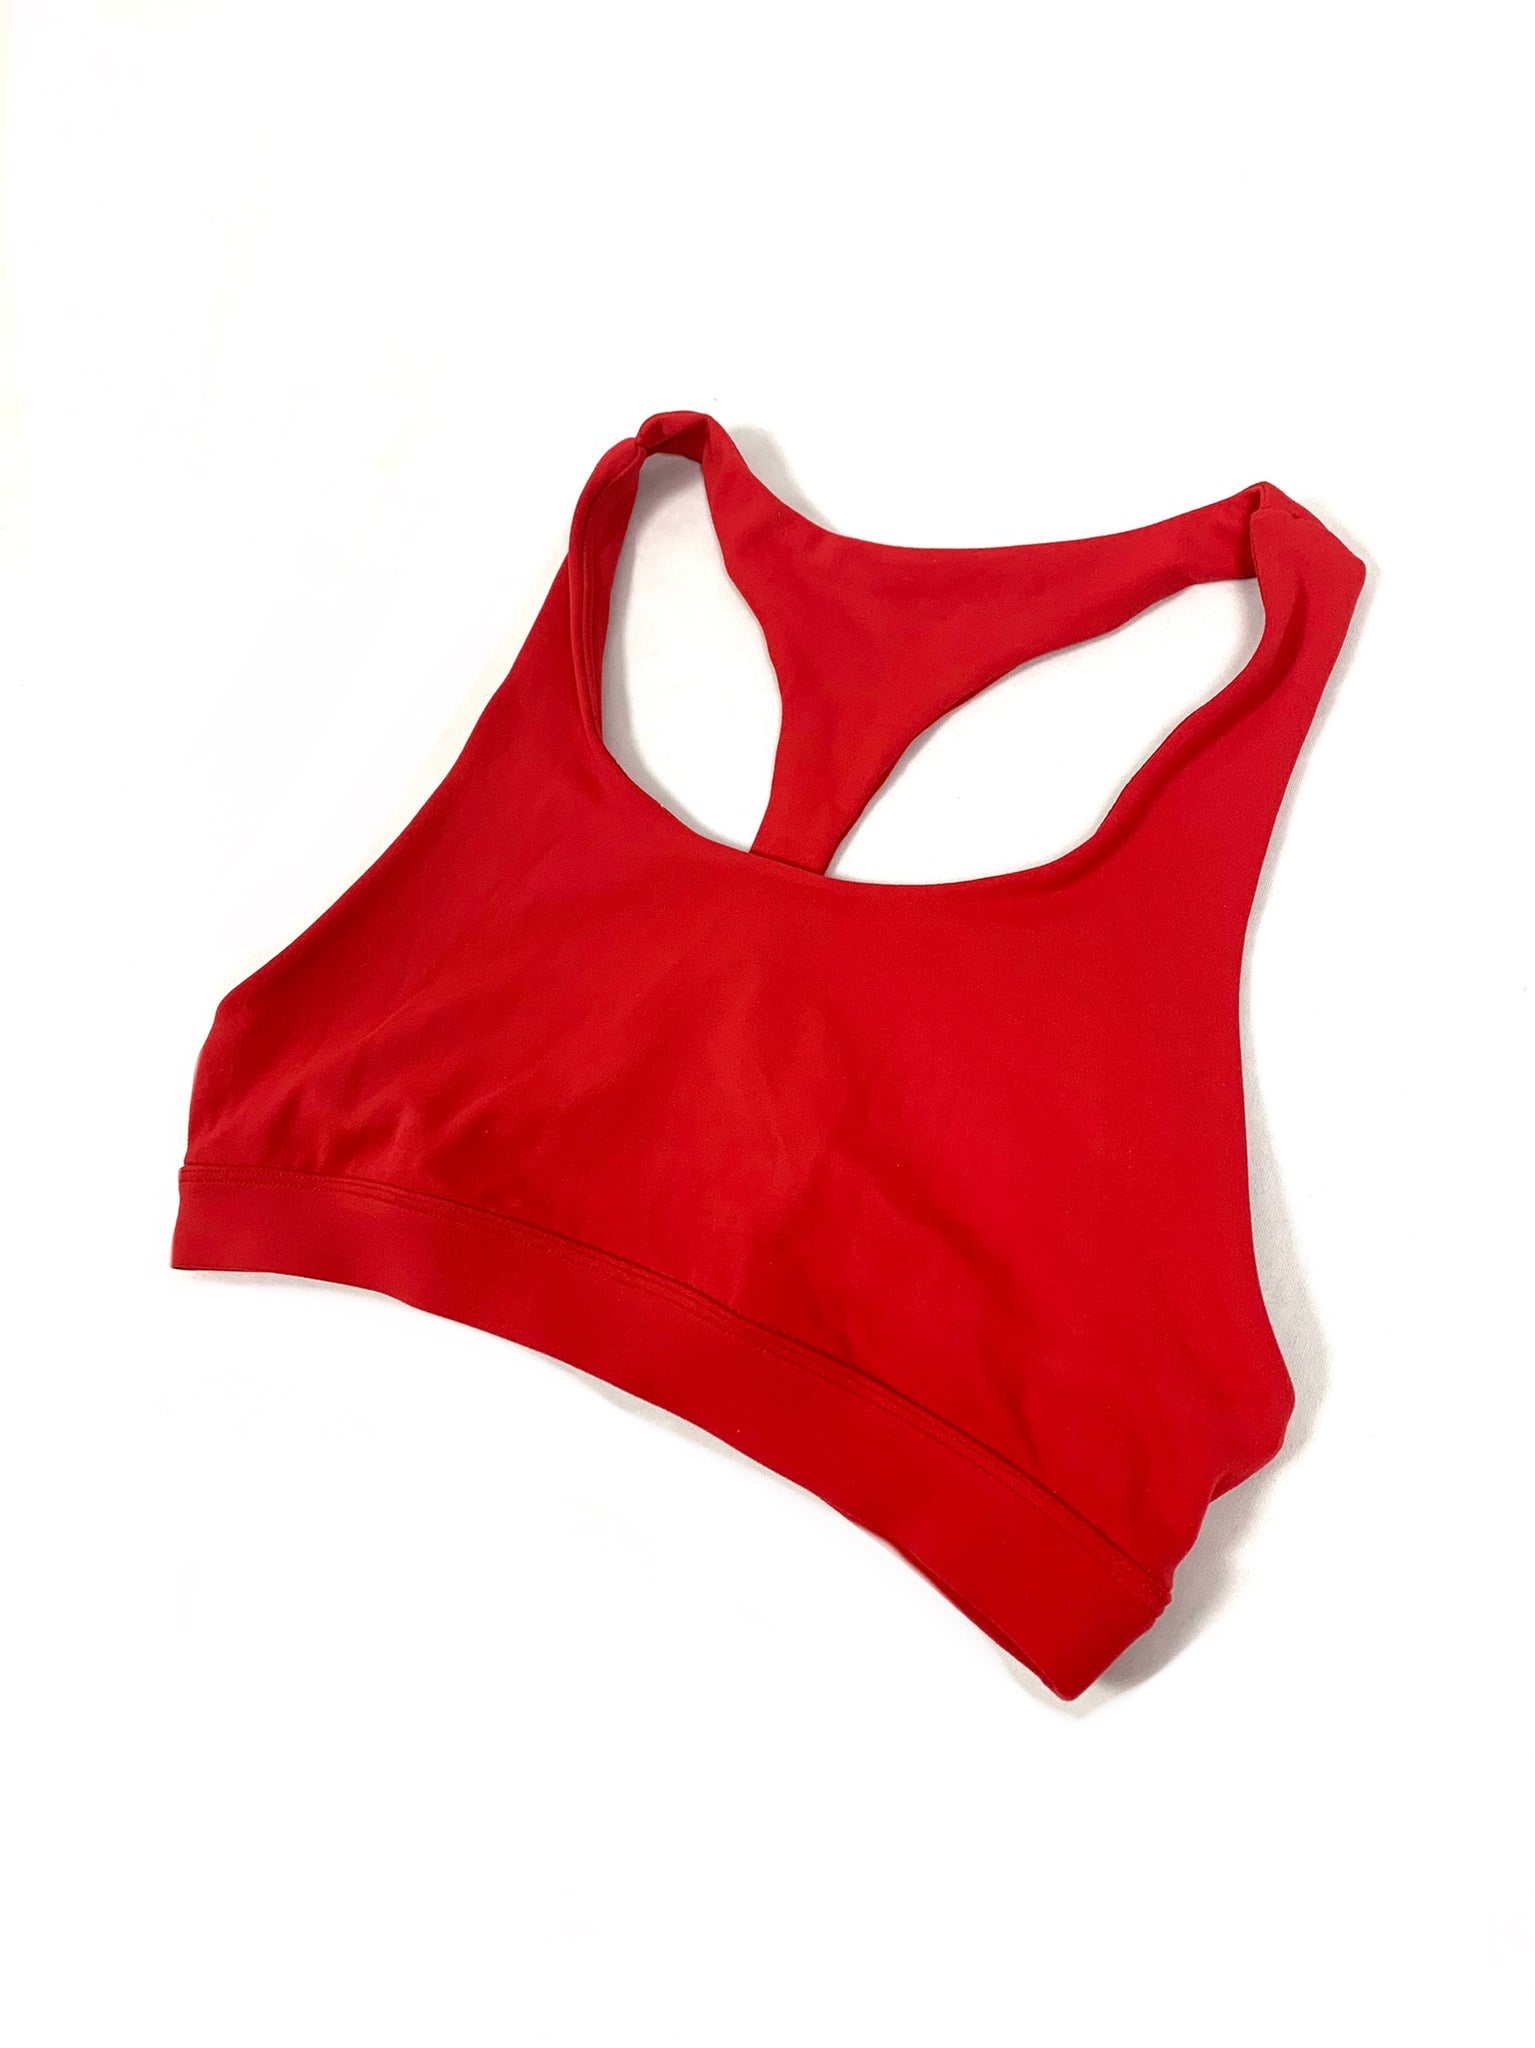 Limitless Sports Bra - Fiery Red – STRONGER THAN YOUR LAST EXCUSE